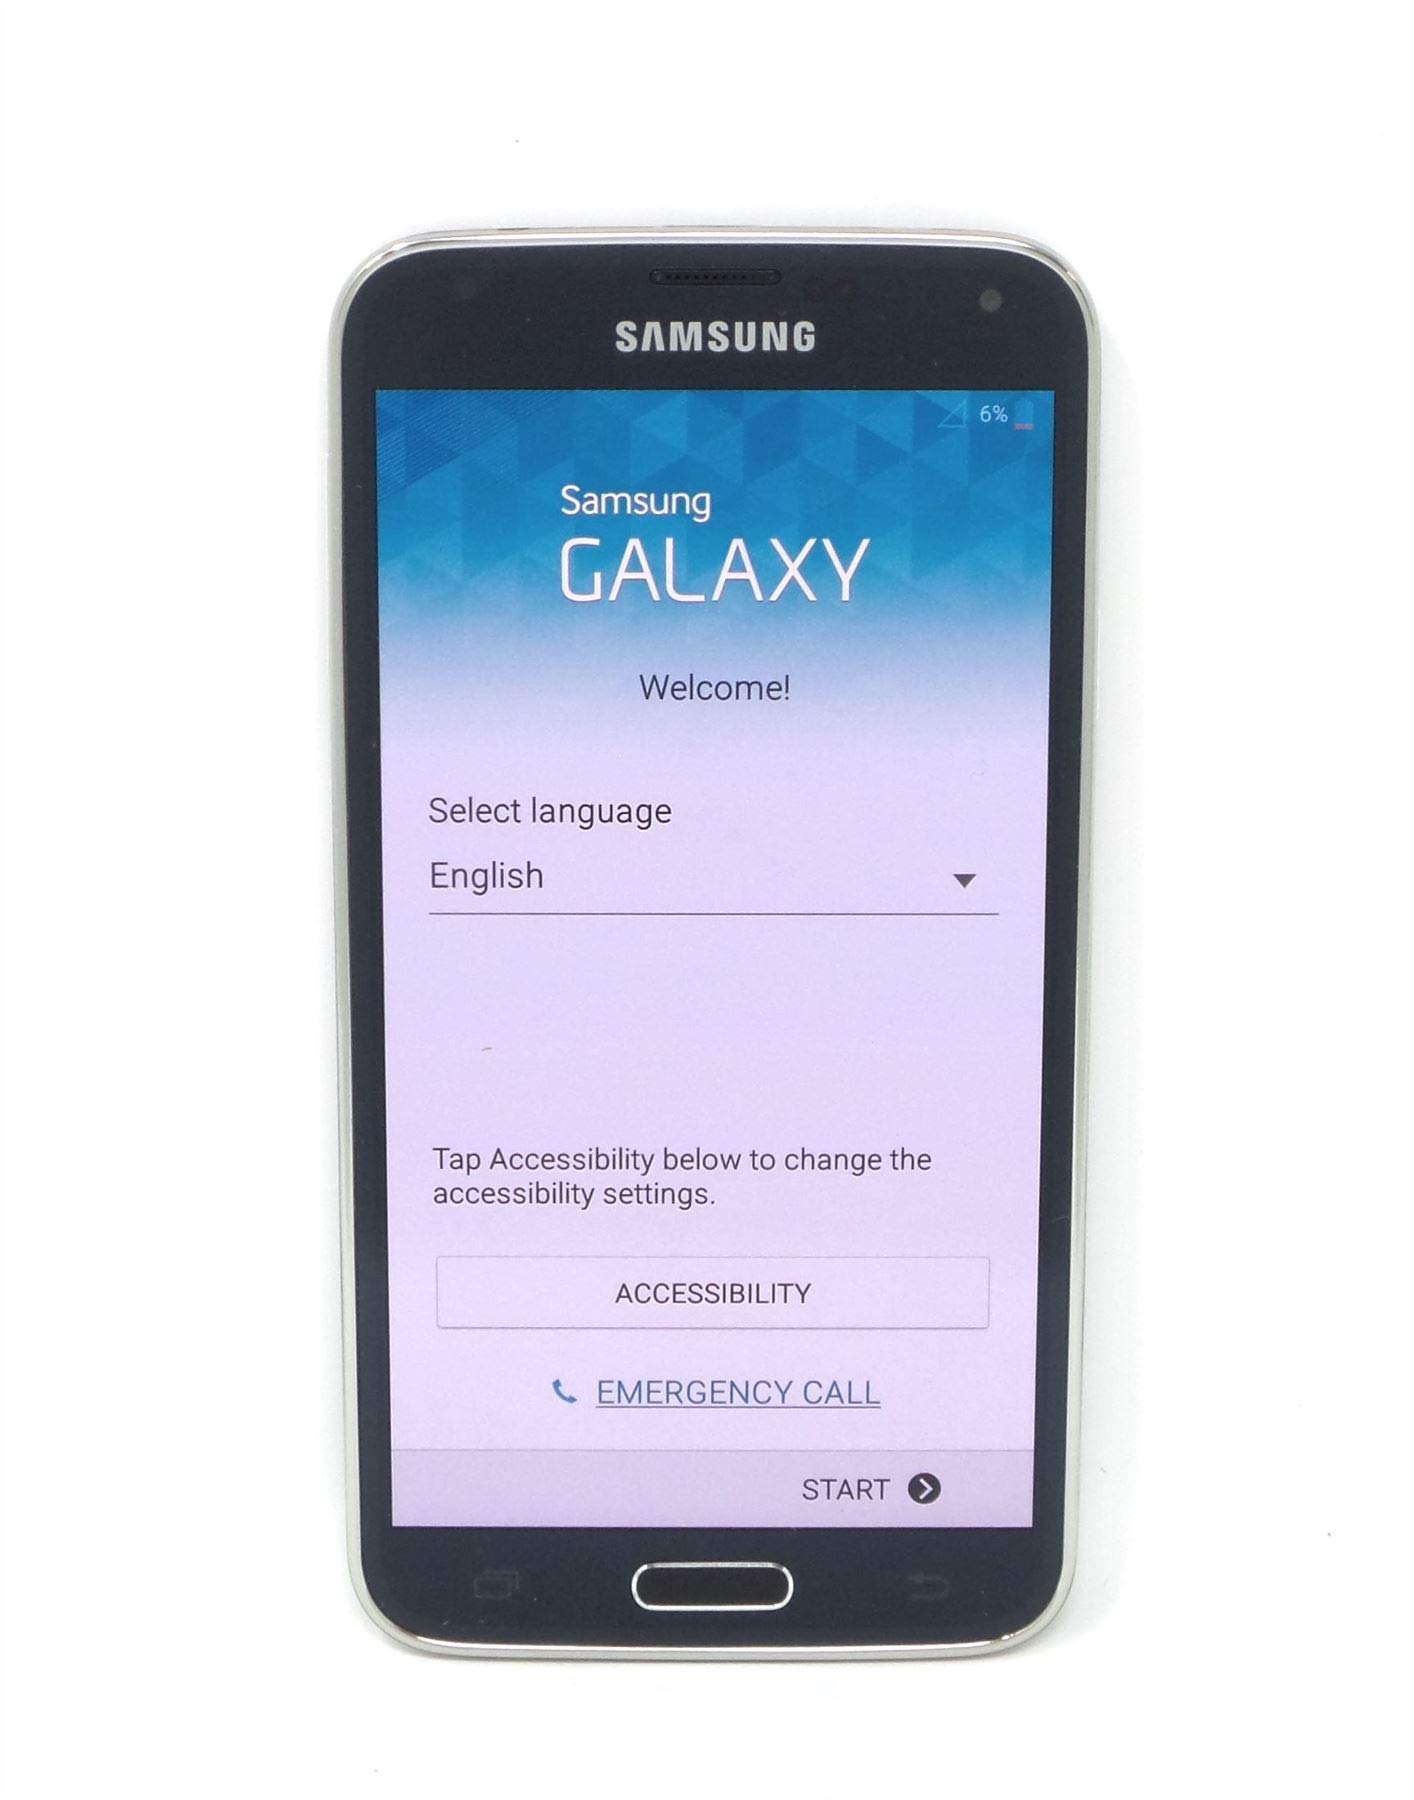 Samsung Galaxy S5 apps and settings